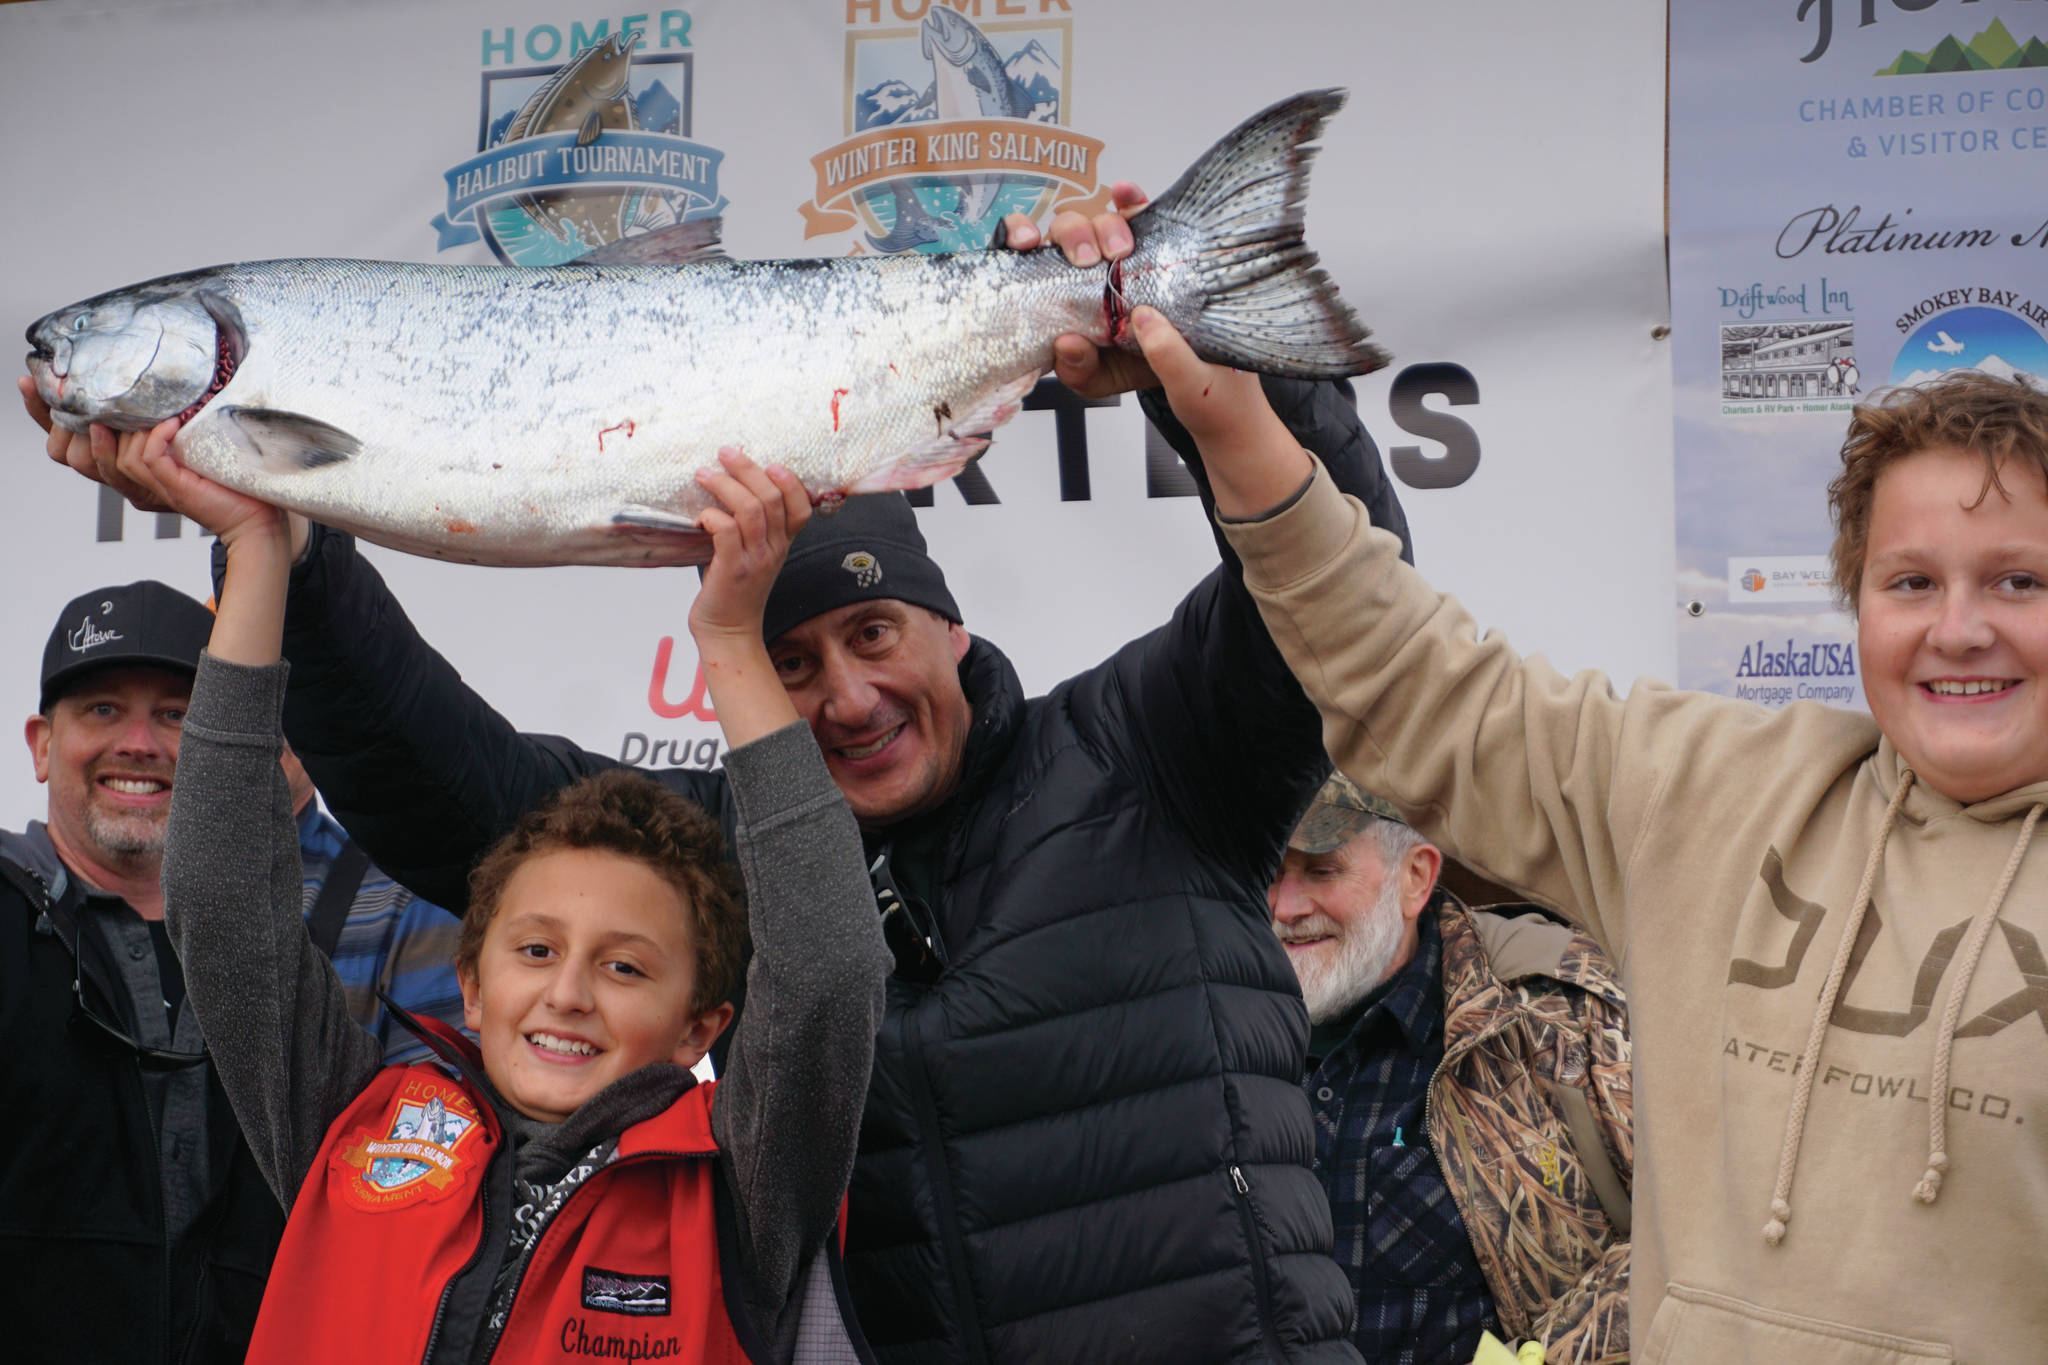 Andrew Marley, the 2021 Homer Winter King Salmon Tournament winner, at left, holds his prize winning 25.62-pound white king salmon on Saturday, April 17, 2021, on the Homer Spit in Homer, Alaska. Helping him are his father, Jay Marley, center, and older brother Weston Marley, right. The family team included Erica Marley, not shown, all fishing on the Fly Dough. (Photo by Michael Armstrong/Homer News)